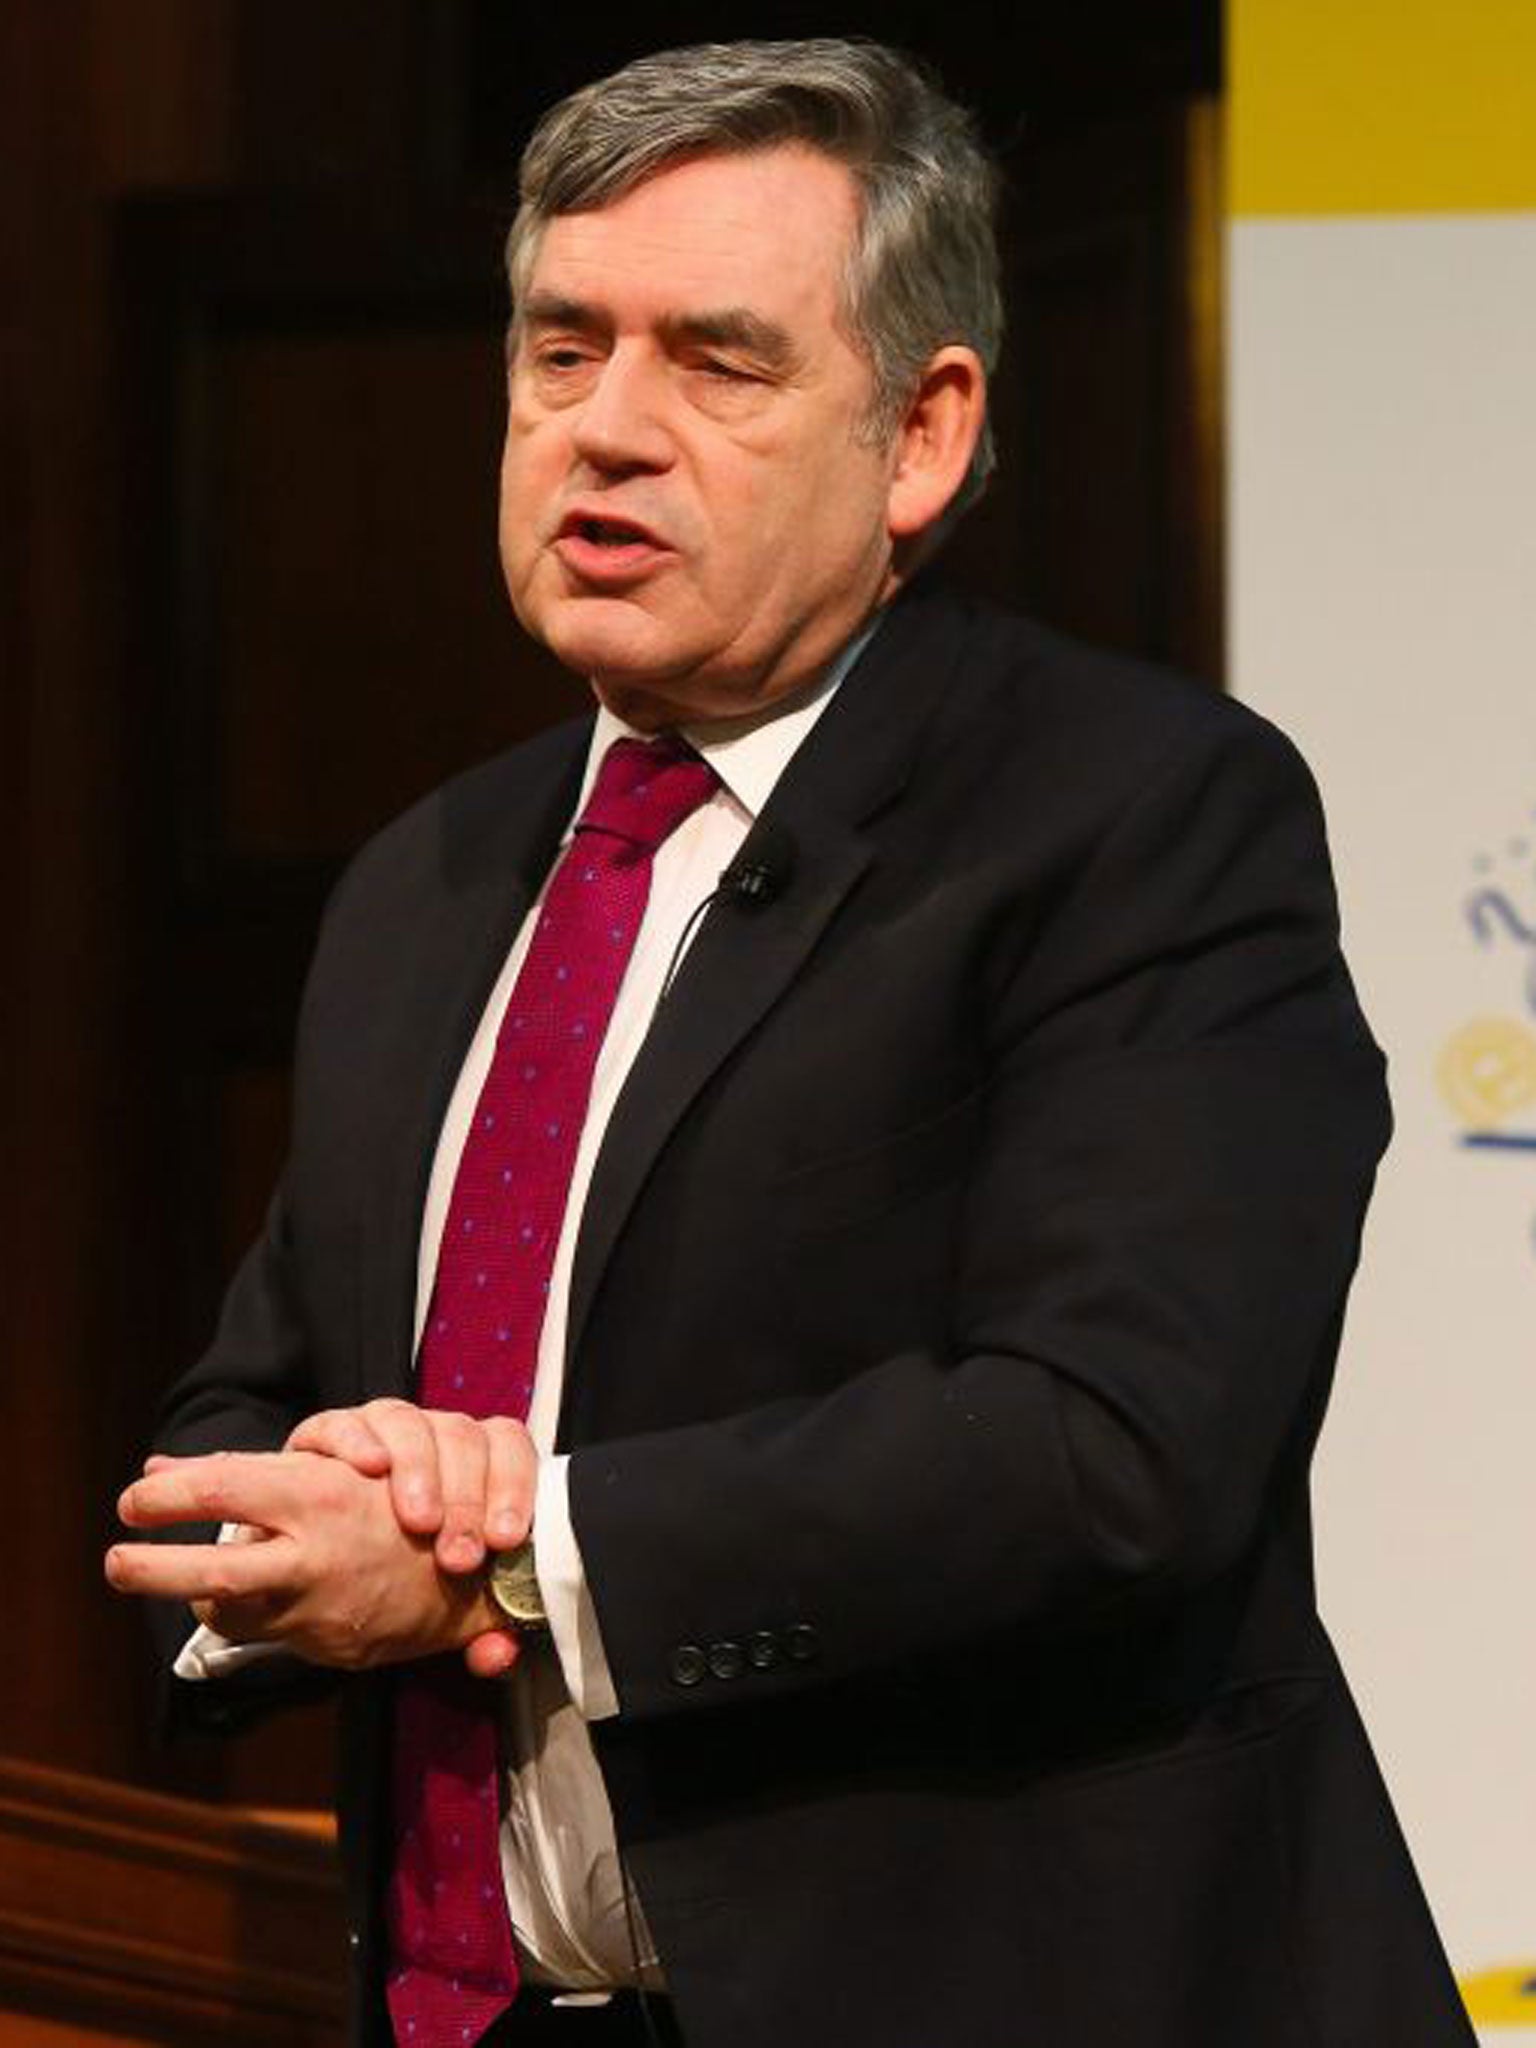 Gordon Brown leads the list of MPs who earn the most outside Parliament but none of the money goes to him personally